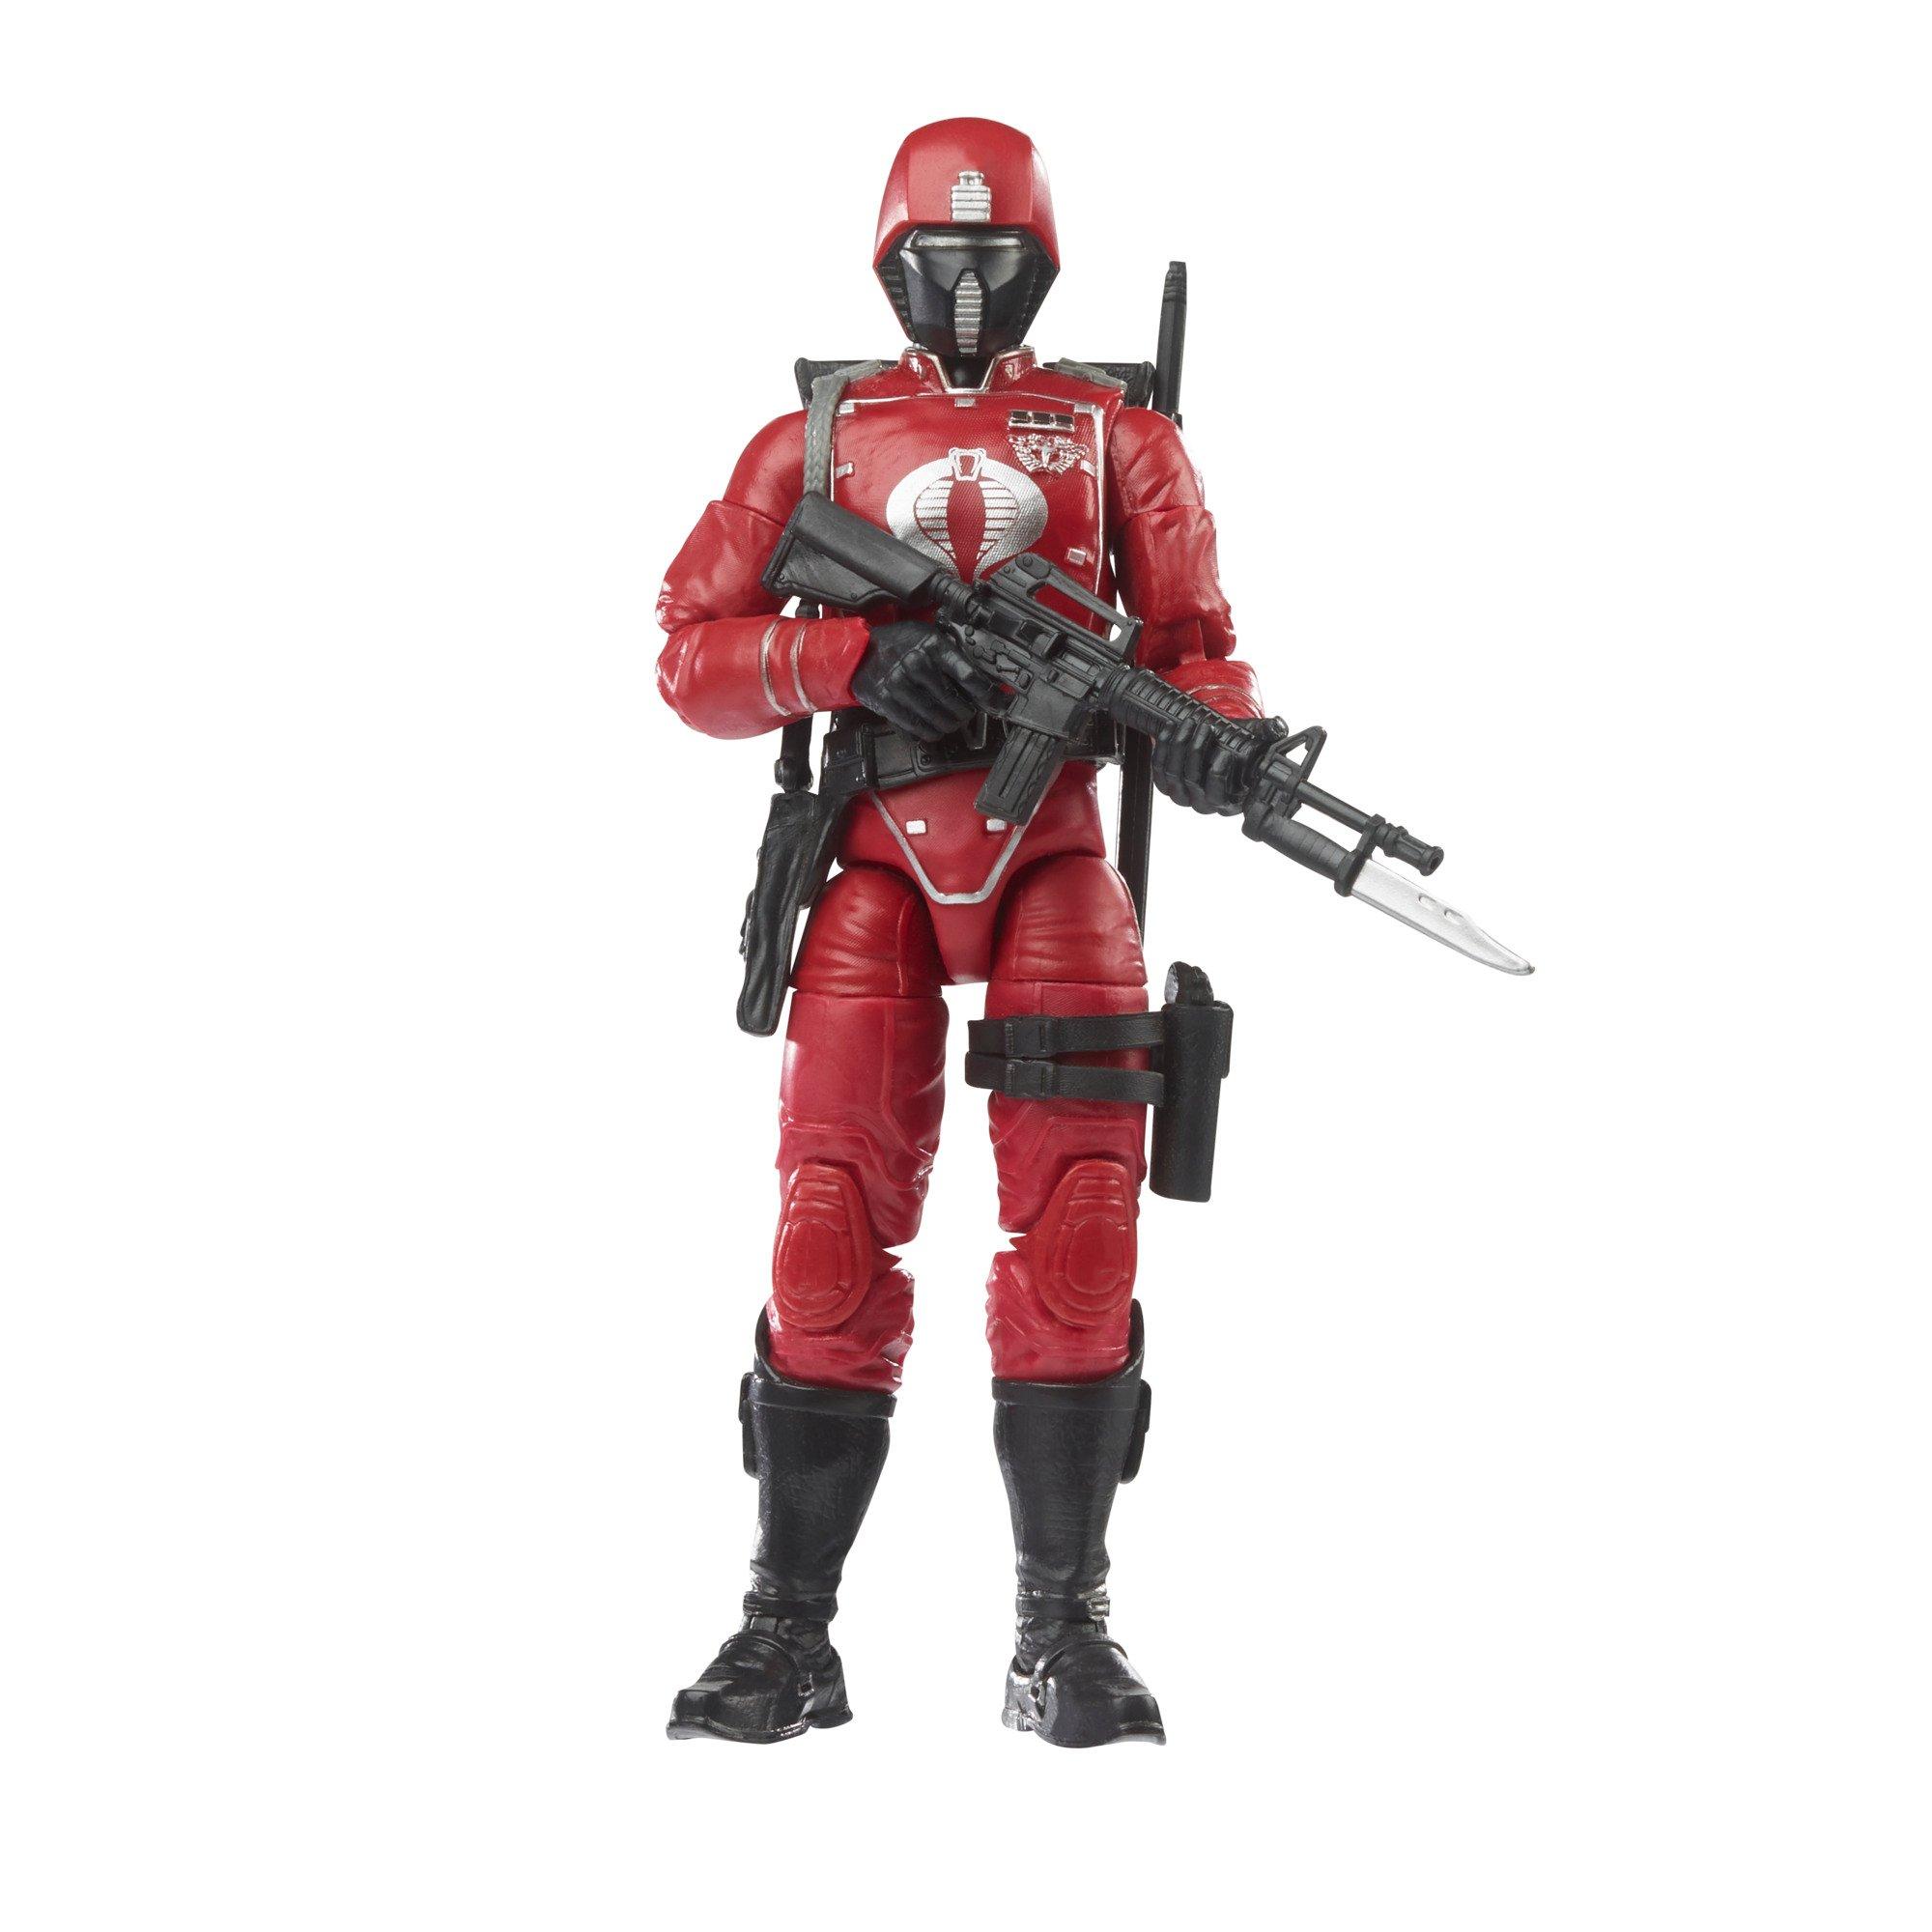 EAN 5010993962228 product image for G.I.Joe Classified Series Crimson Guard 6-in Action Figure | upcitemdb.com